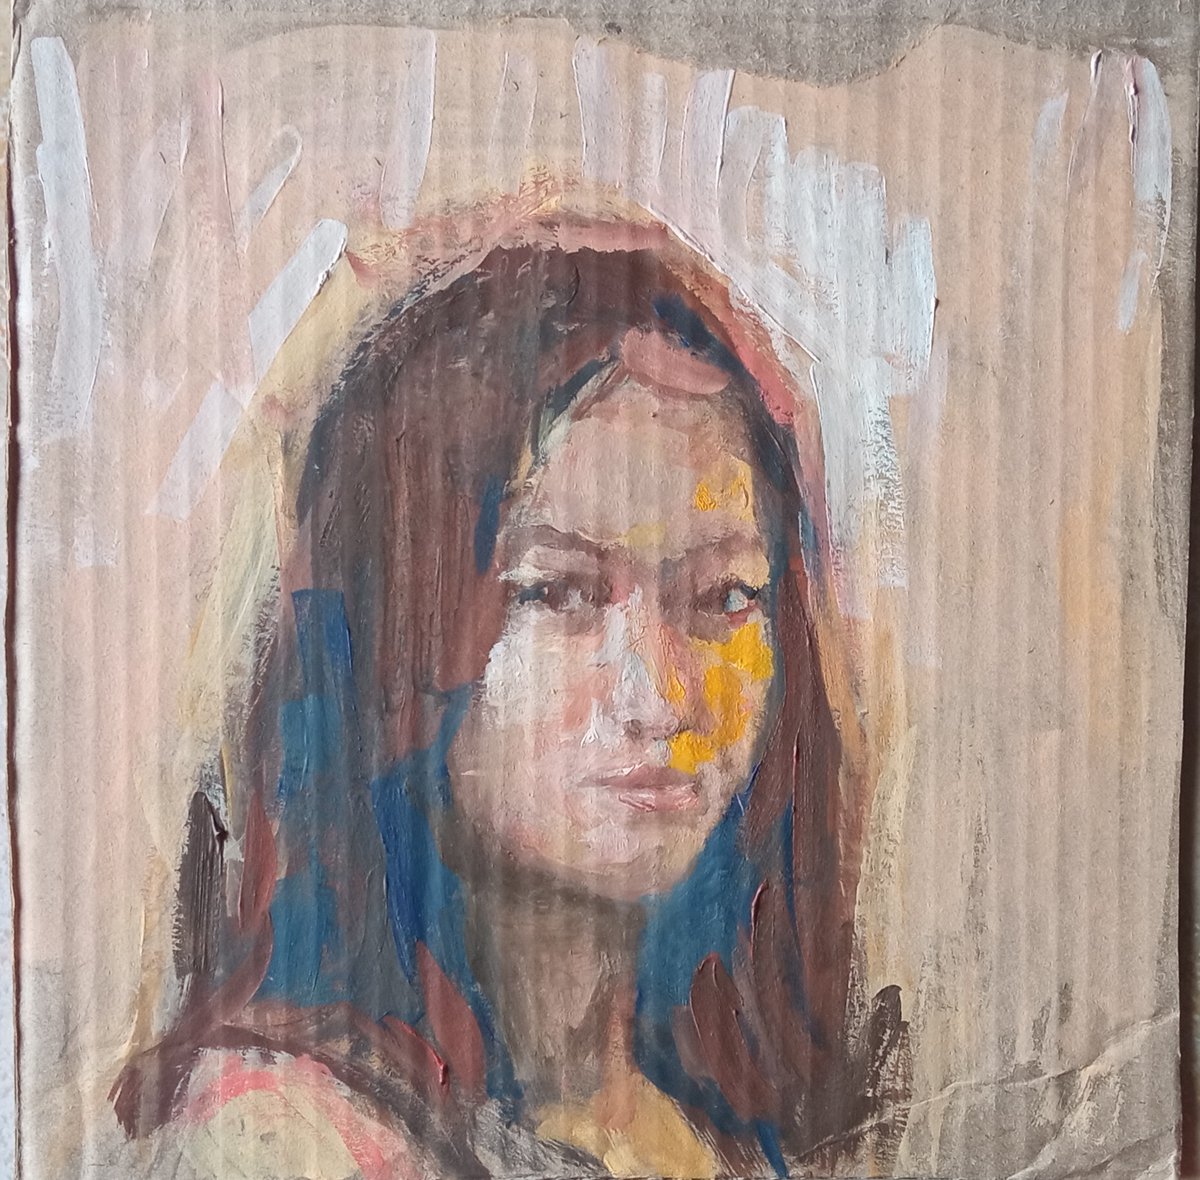 Some small #masterstudy from nov 2021 (after Zin Lim). A #portrait done with oil paint

#イラスト #일러스트 #Illustshare #描画 #oilpainting #oilsketch #oilportrait #girlportrait #study #paintings #drawing #art #contemporaryart #painting #doodle #portraitsketch #portraitpainting